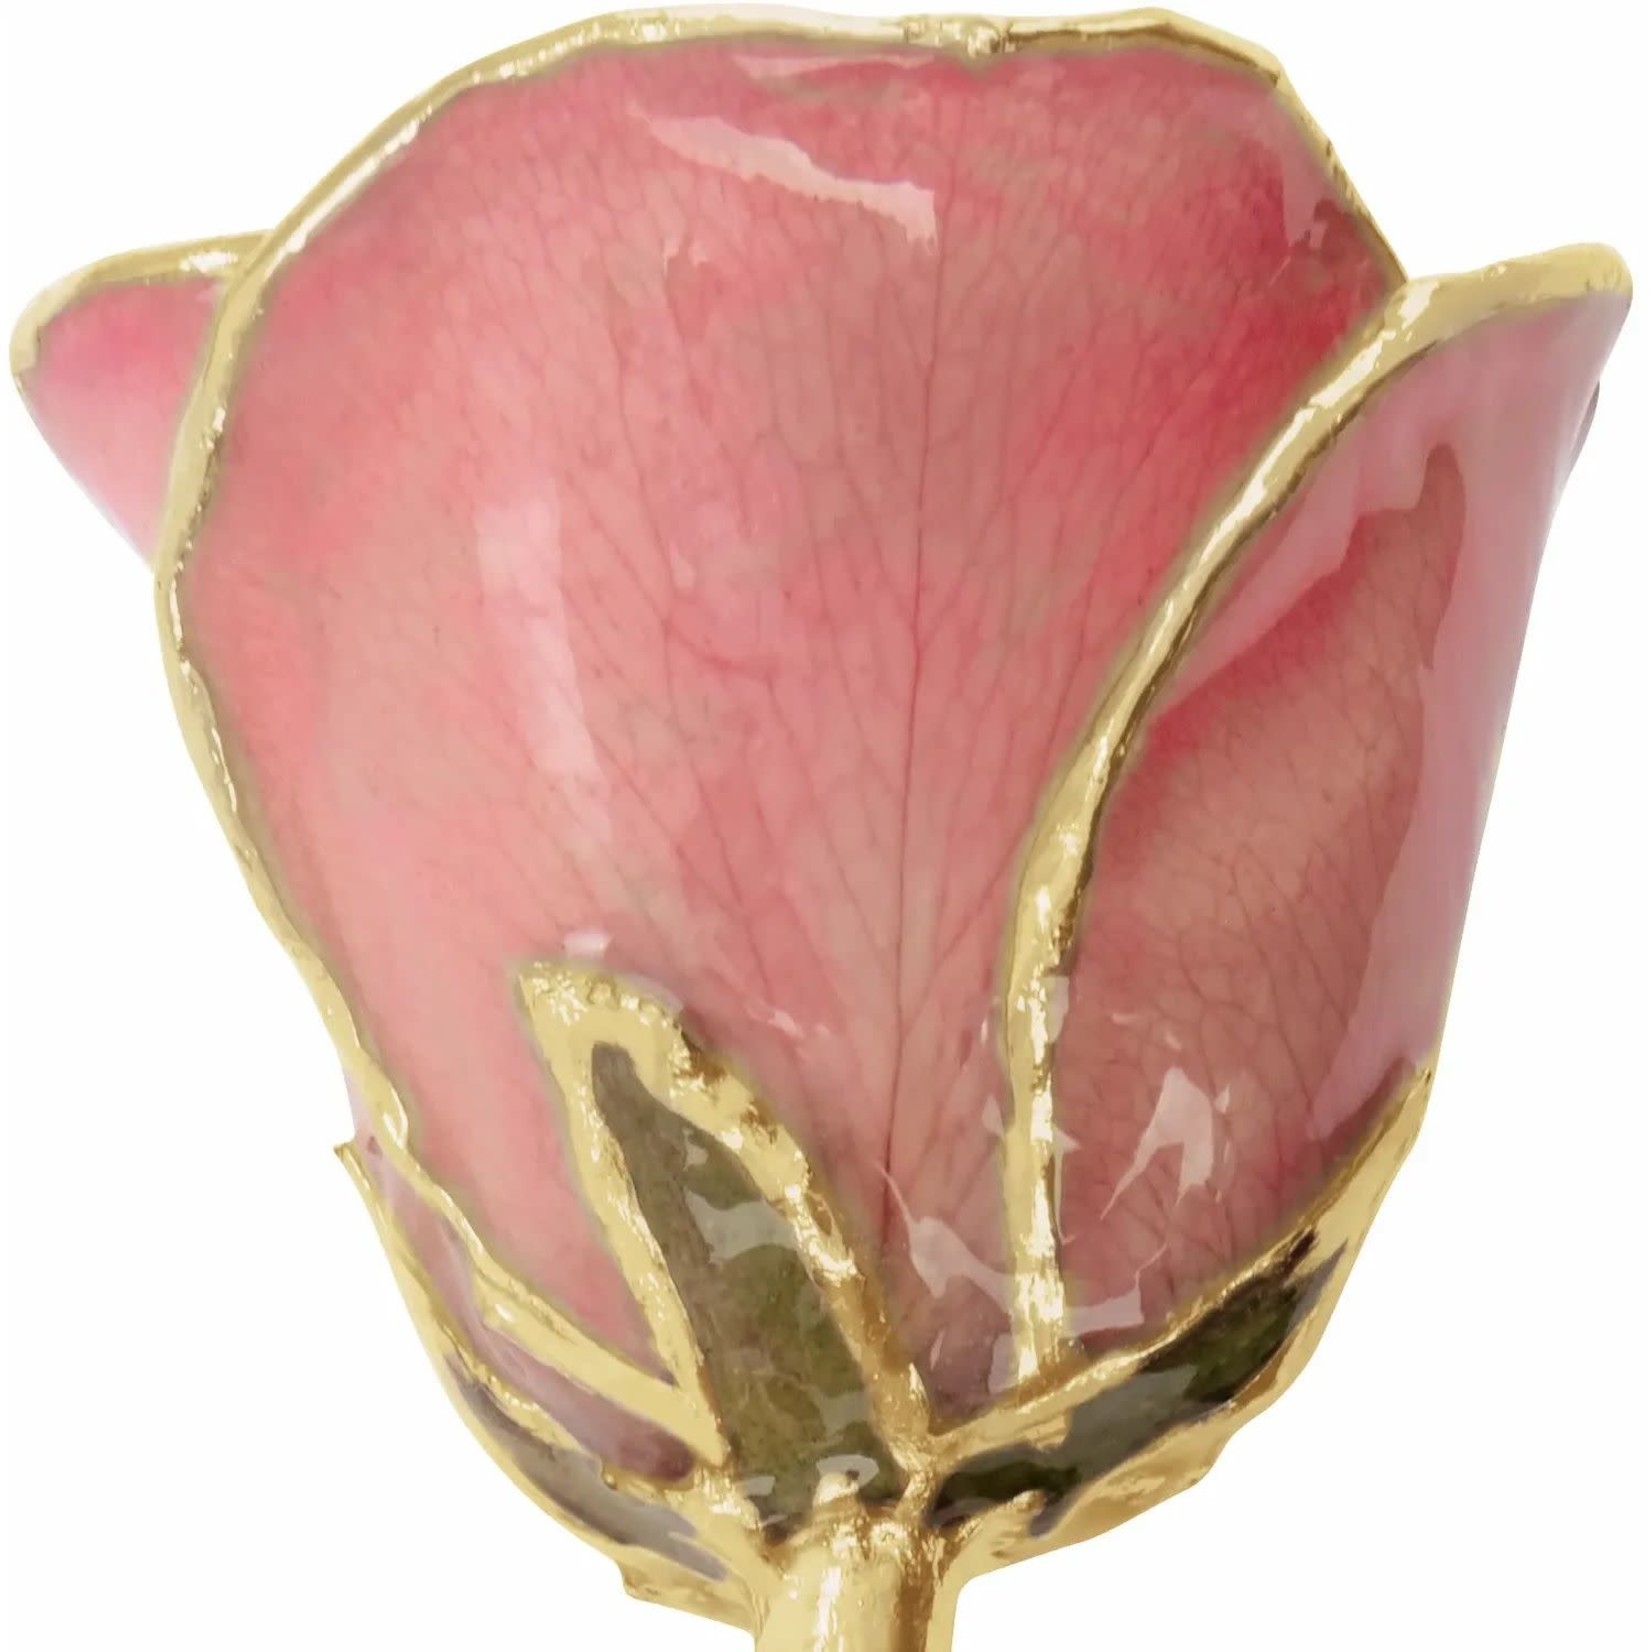 STULLER INC. Lacquer Dipped 24K Gold Trimmed Pink Rose